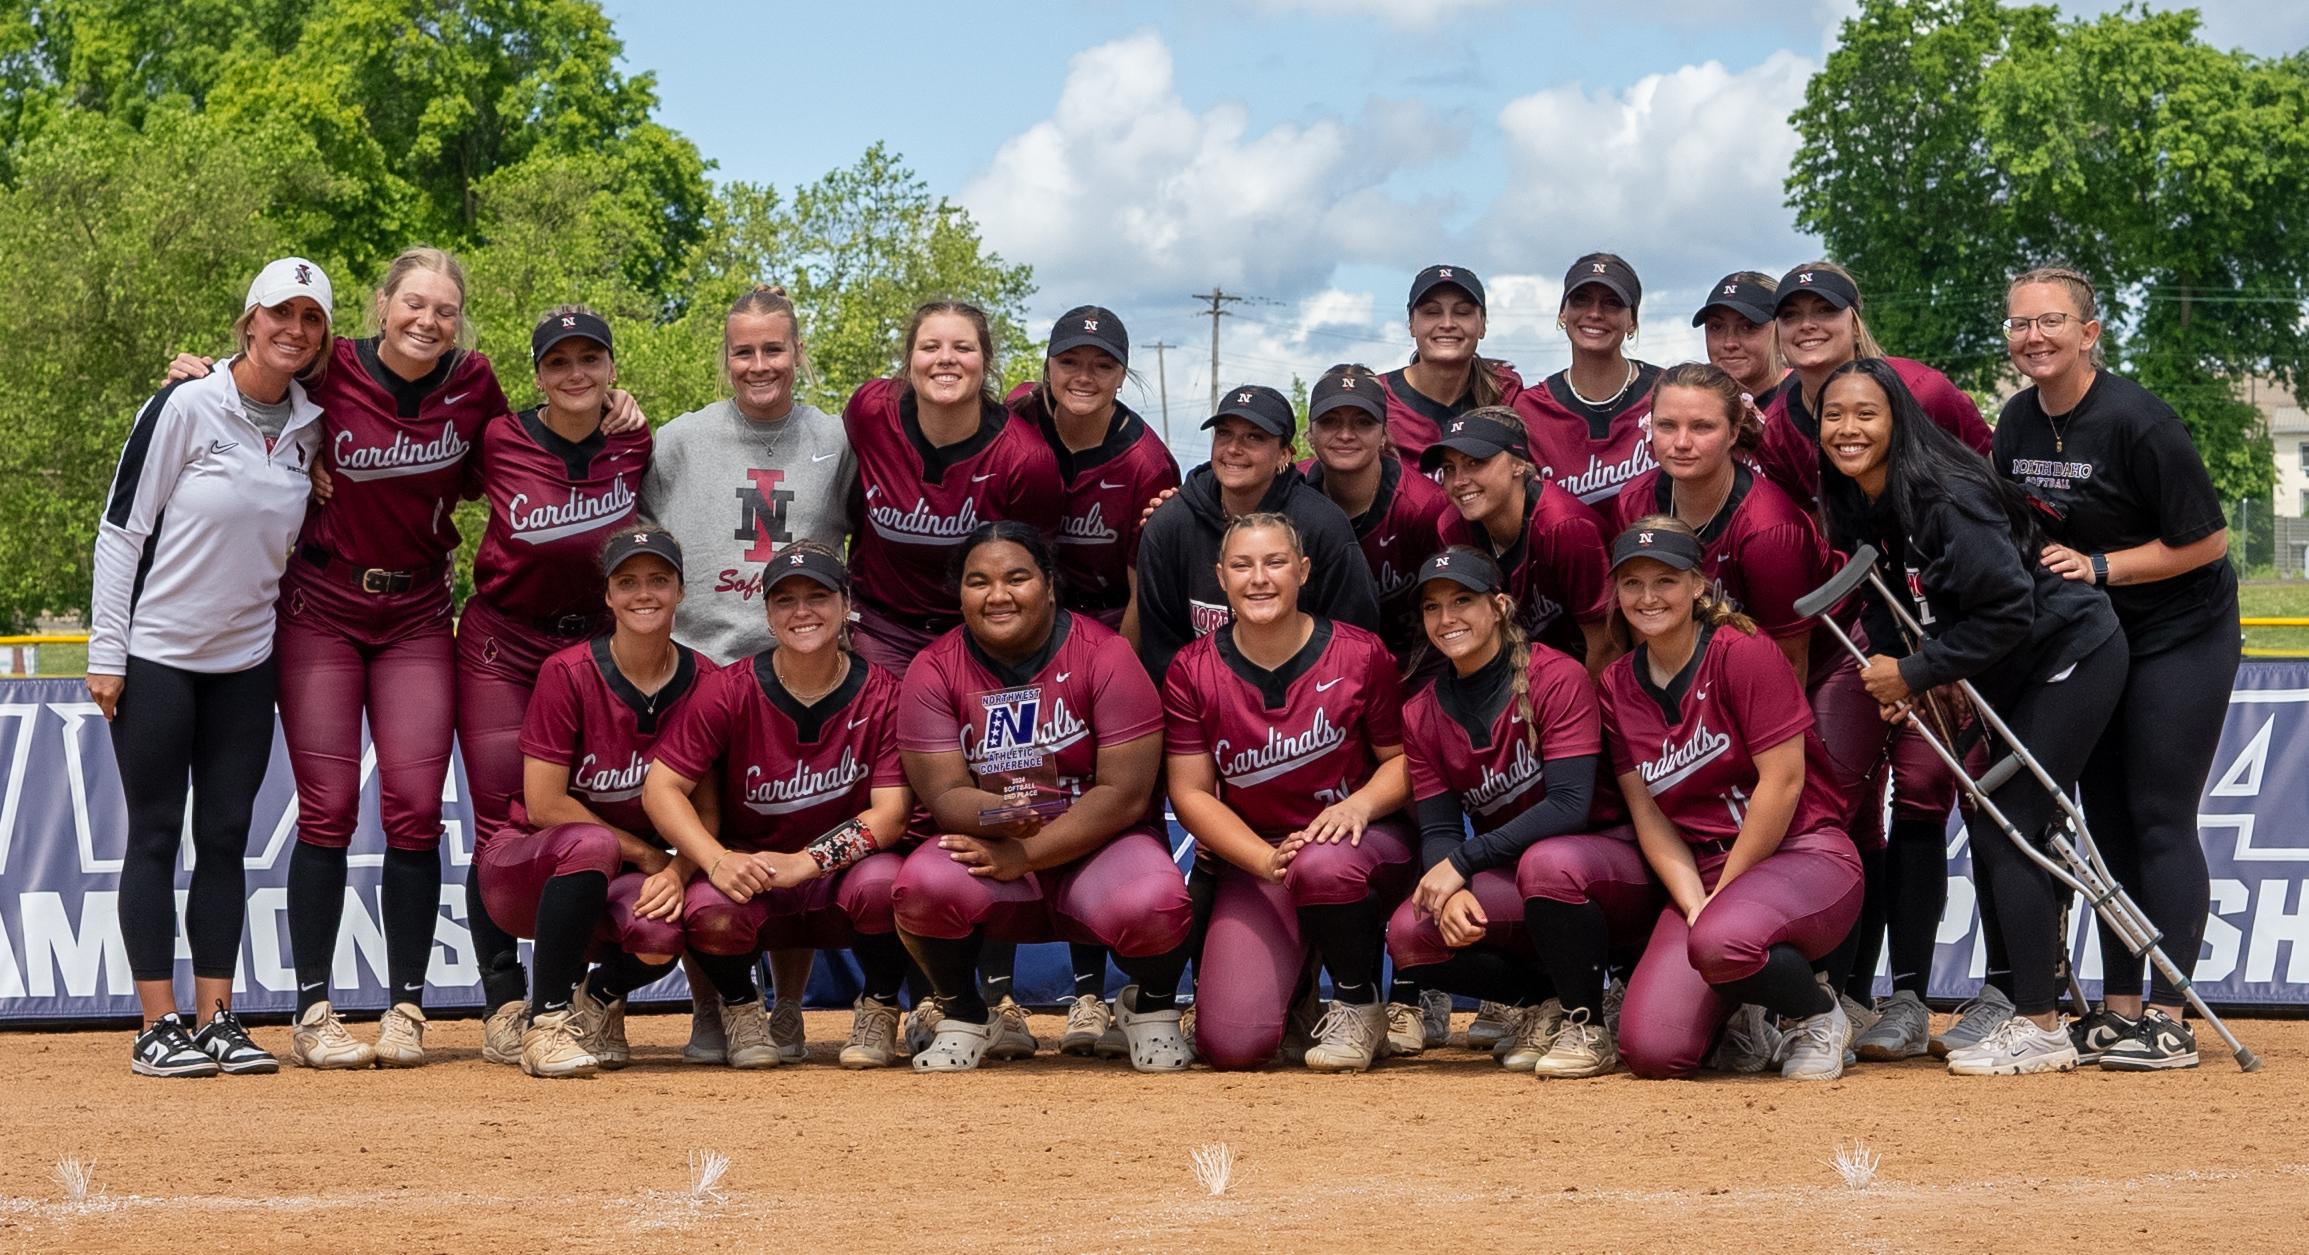 The North Idaho College softball team finished runner-up in the Northwest Athletic Conference Championships at Delta Park in Portland on Sunday. IN the back row, from left are head coach Shay Chapman, Faith Nichols, Sophia Solberg, Madelynne Hommel, Corine Doran, Emily Schulhauser, Kennedy Hobson, Delaney Gosch, Karaline Pfeifer, Tayler Thomas, Brooklyn Wullenwaber, Summer Makinster, Jaylyn Christensen, Kaylee Vieira, Haydyn Yanaguchi and assistant coach Megan Carver. In the front row are Karli Kostoff, Hayden Rockwell, Kani Korok, Kristine Schmidt, Hailey Hillman and Kennedy Jewell.